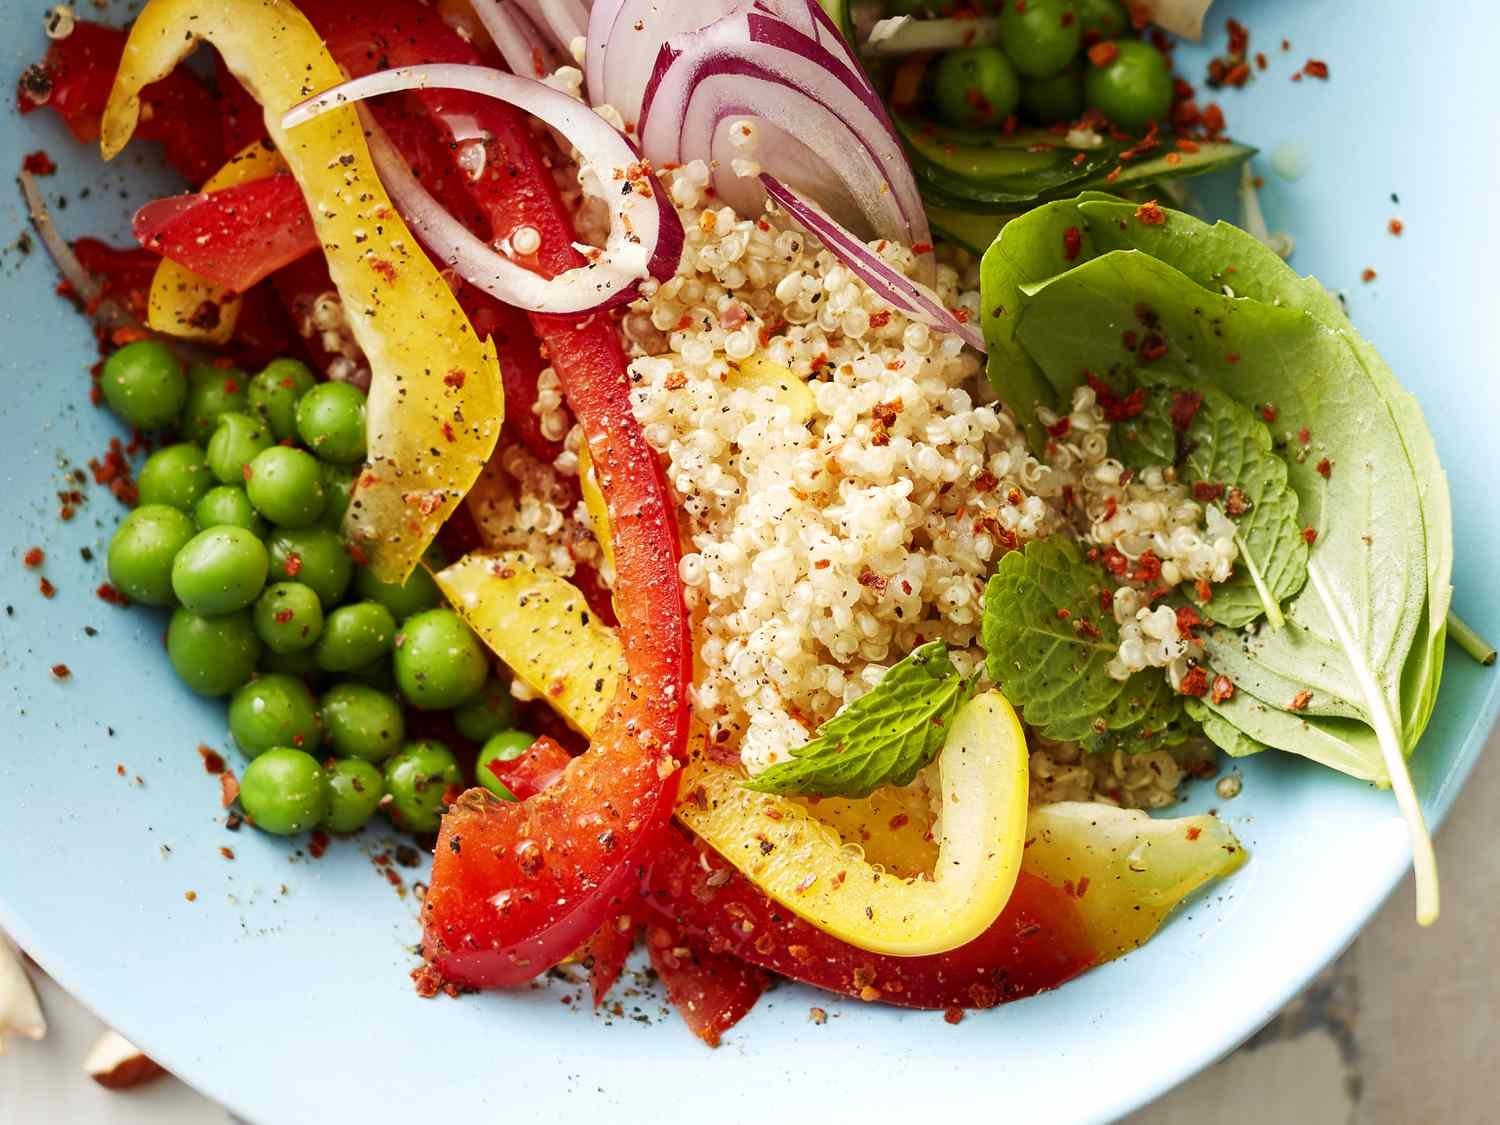 Quinoa Is a Bonafide Superfood—Here Are 6 Reasons to Love This Healthy Grain